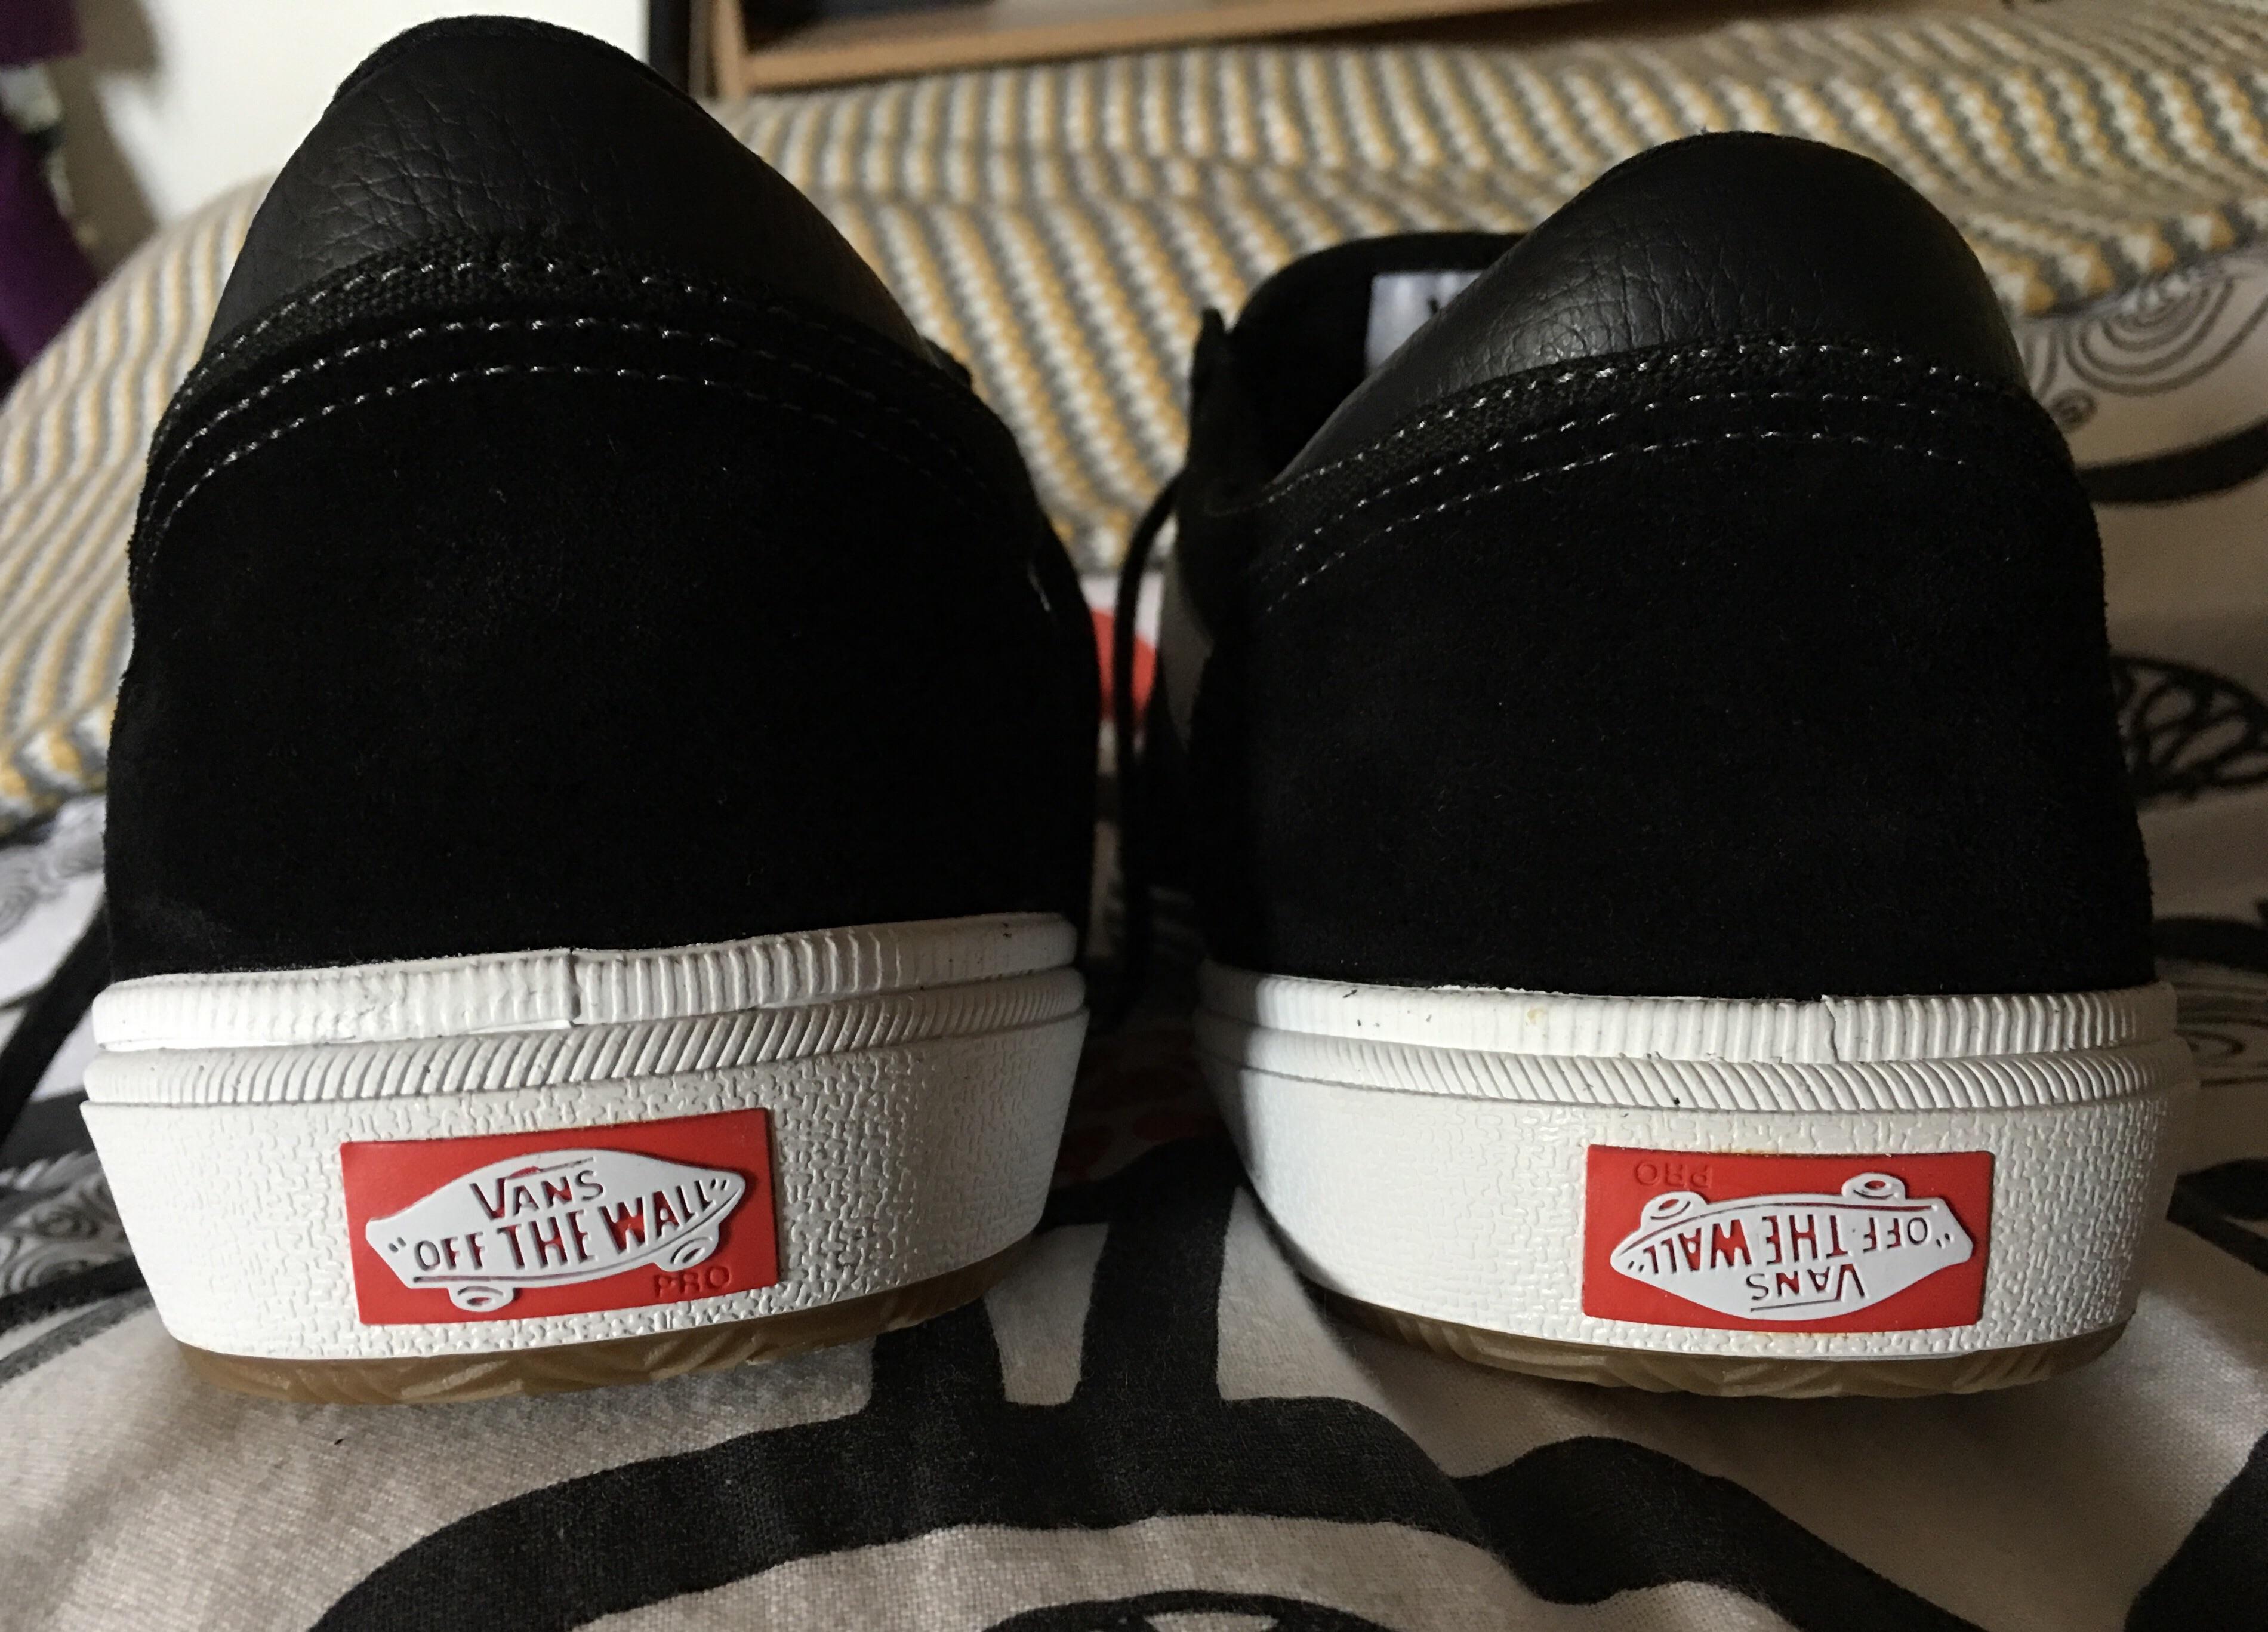 The Vans Logo - One of my new shoes has the Vans logo upside down